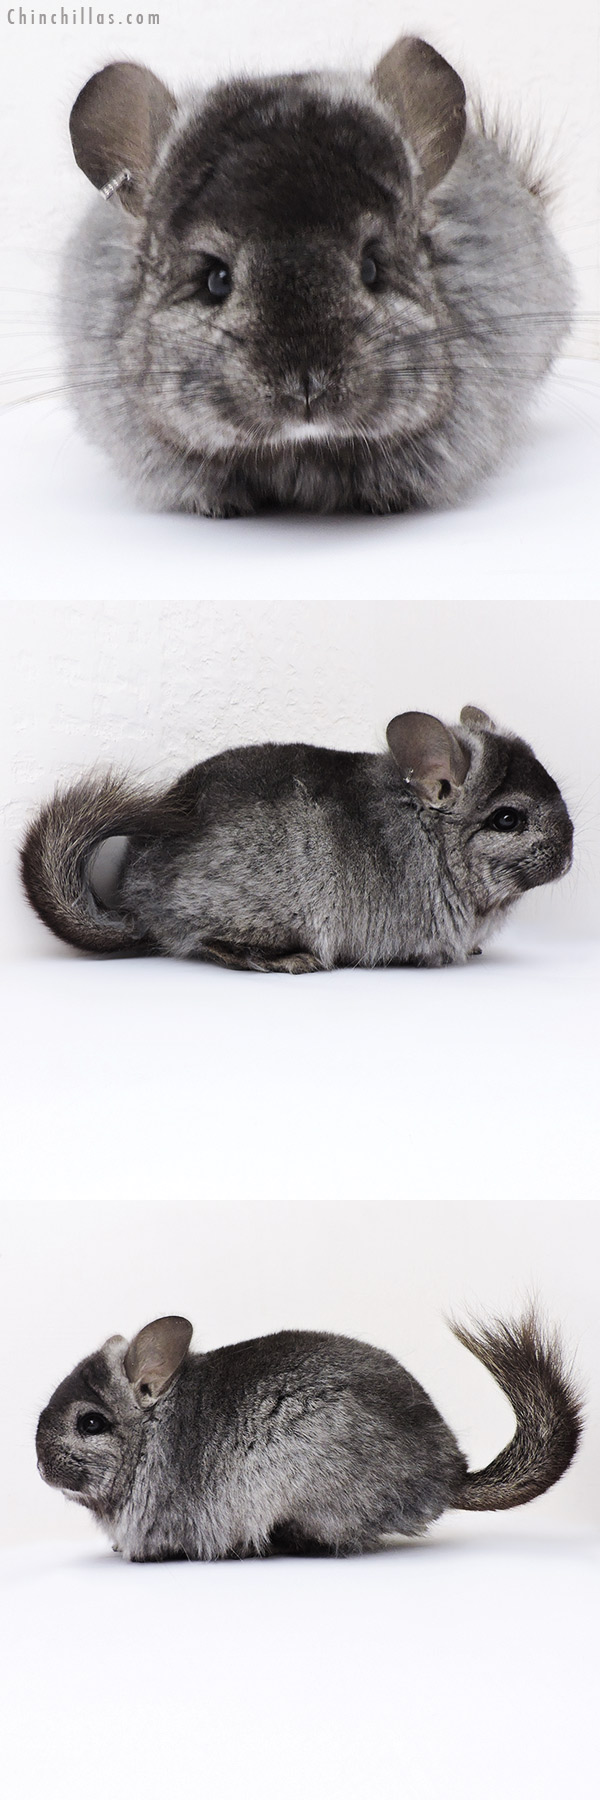 Chinchilla or related item offered for sale or export on Chinchillas.com - 18317 Ebony  Royal Persian Angora Female Chinchilla